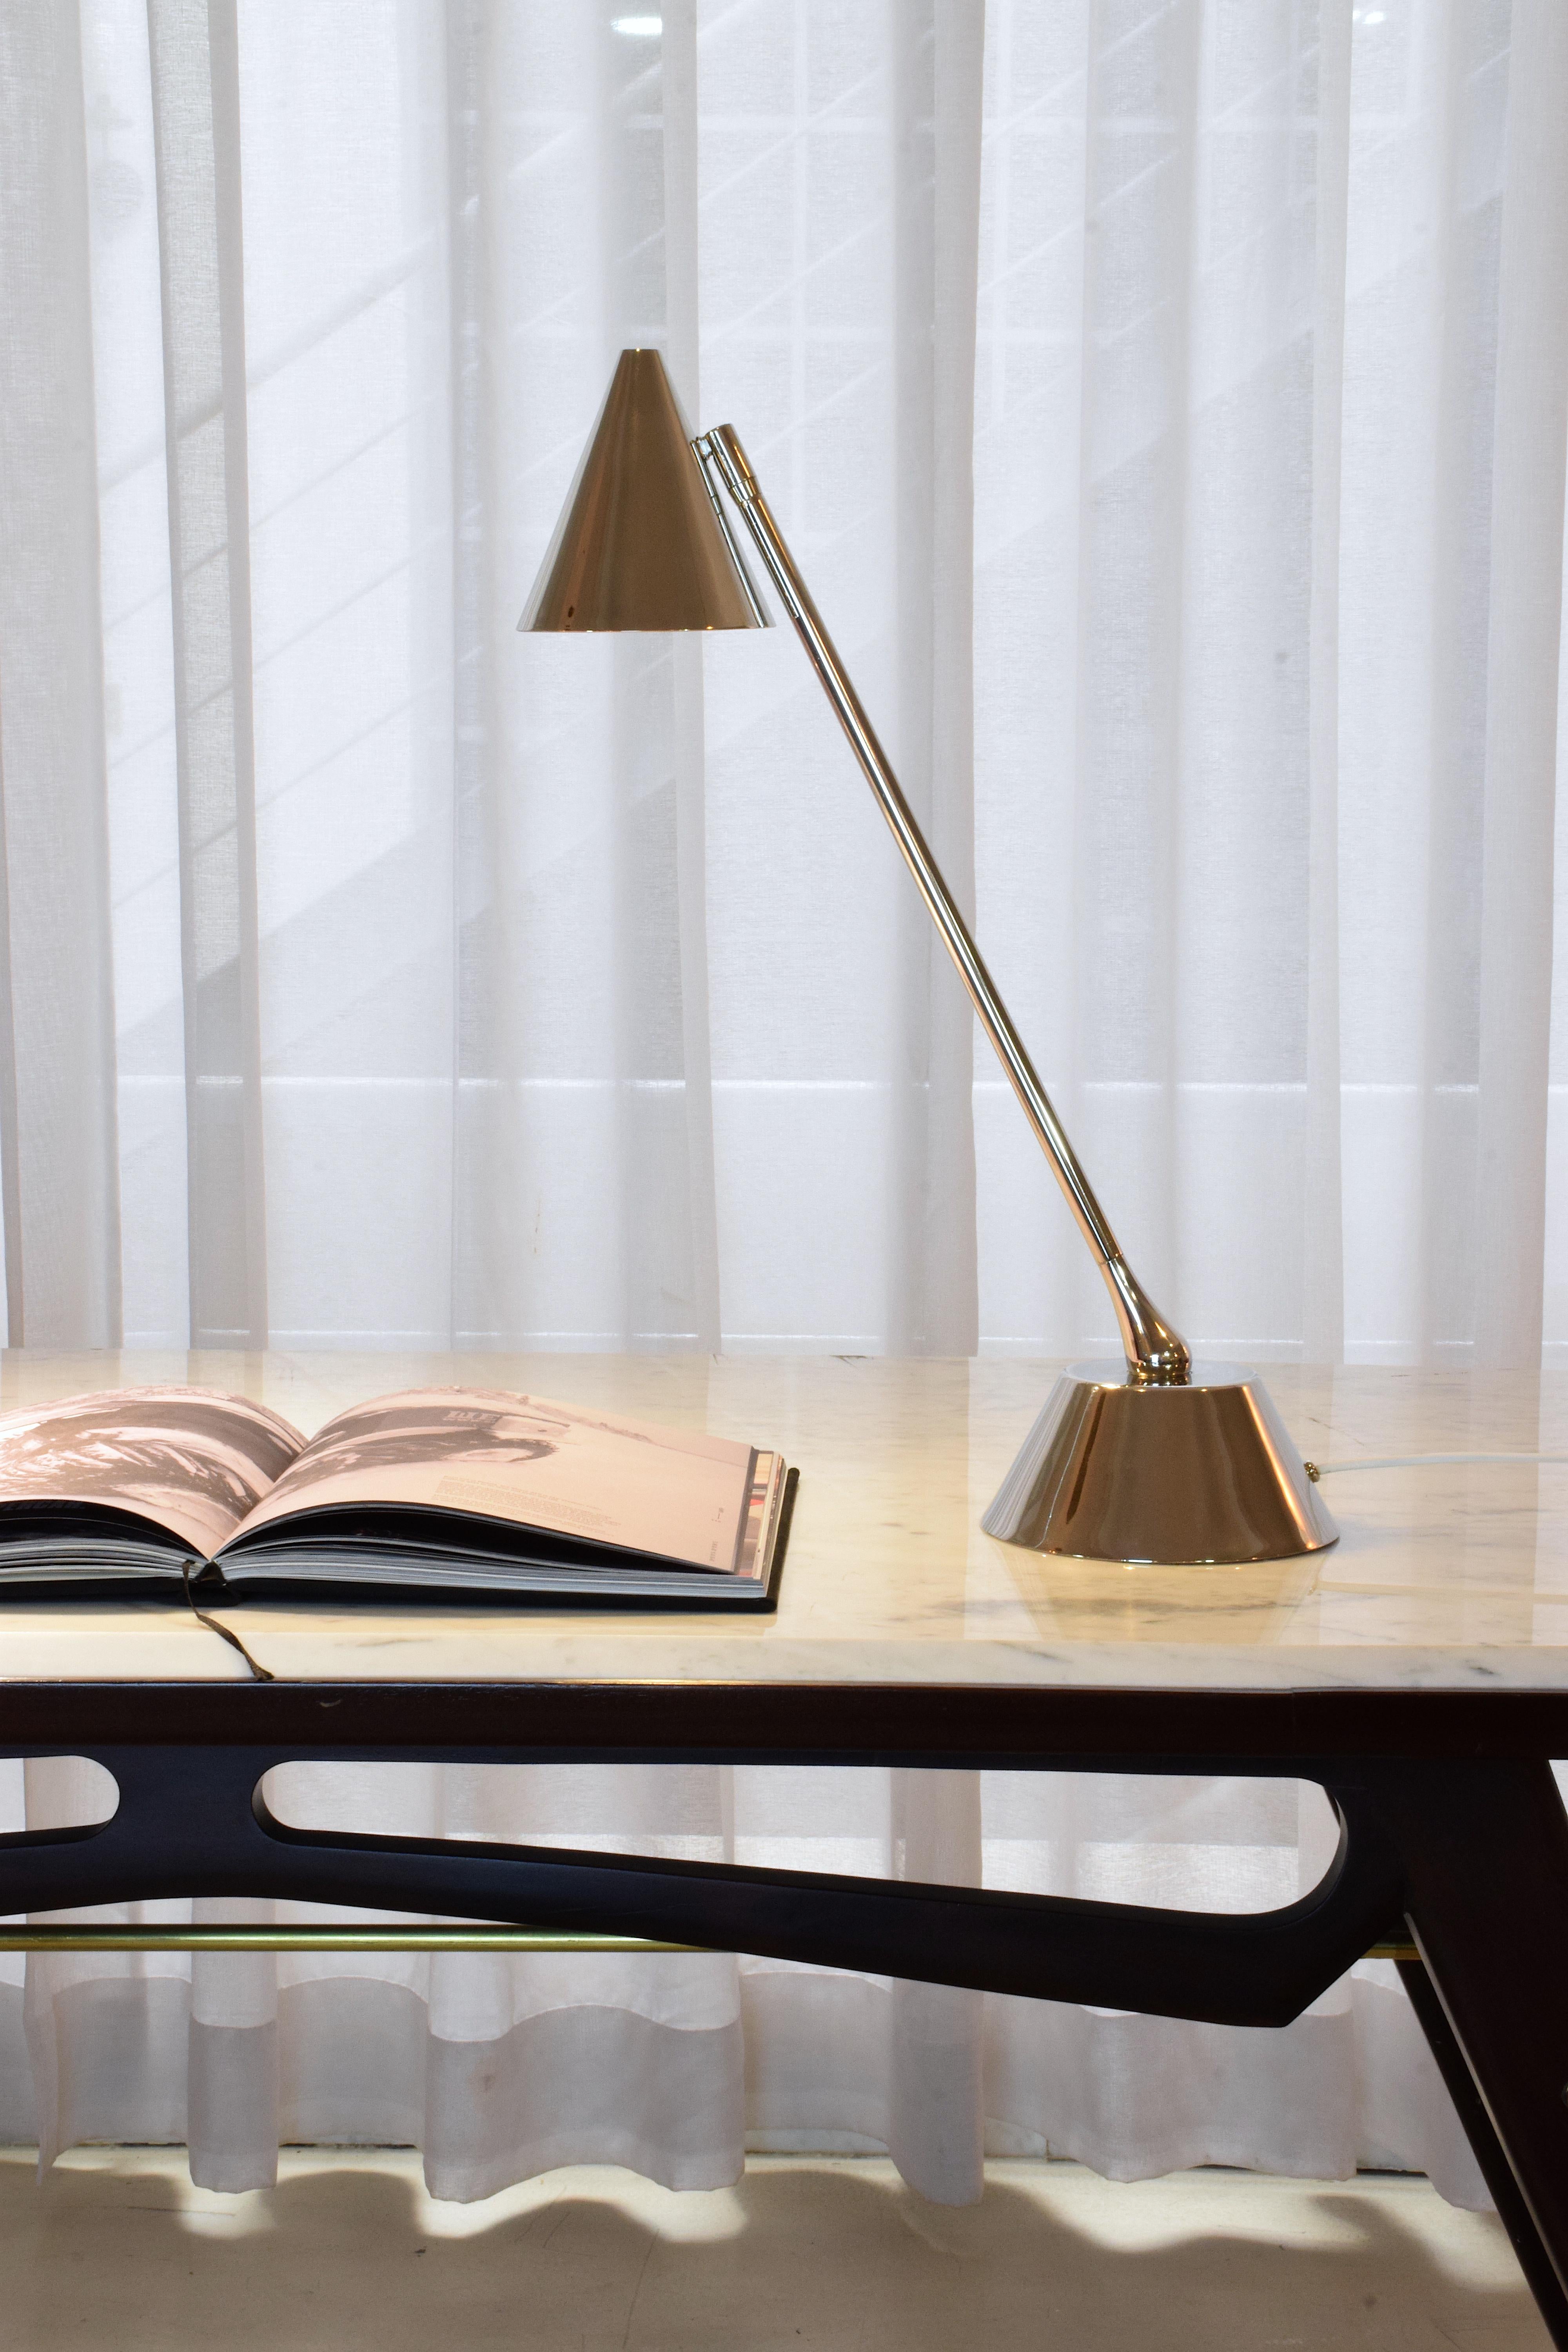 The De.Light T2 is a sophisticated table or desk lamp designed in solid nickel-plated brass with a directional tubular stand and an adjustable conic shade.

G9 - 7 w Max
110 V - 230 V LED 

This piece is professionally wired with the highest